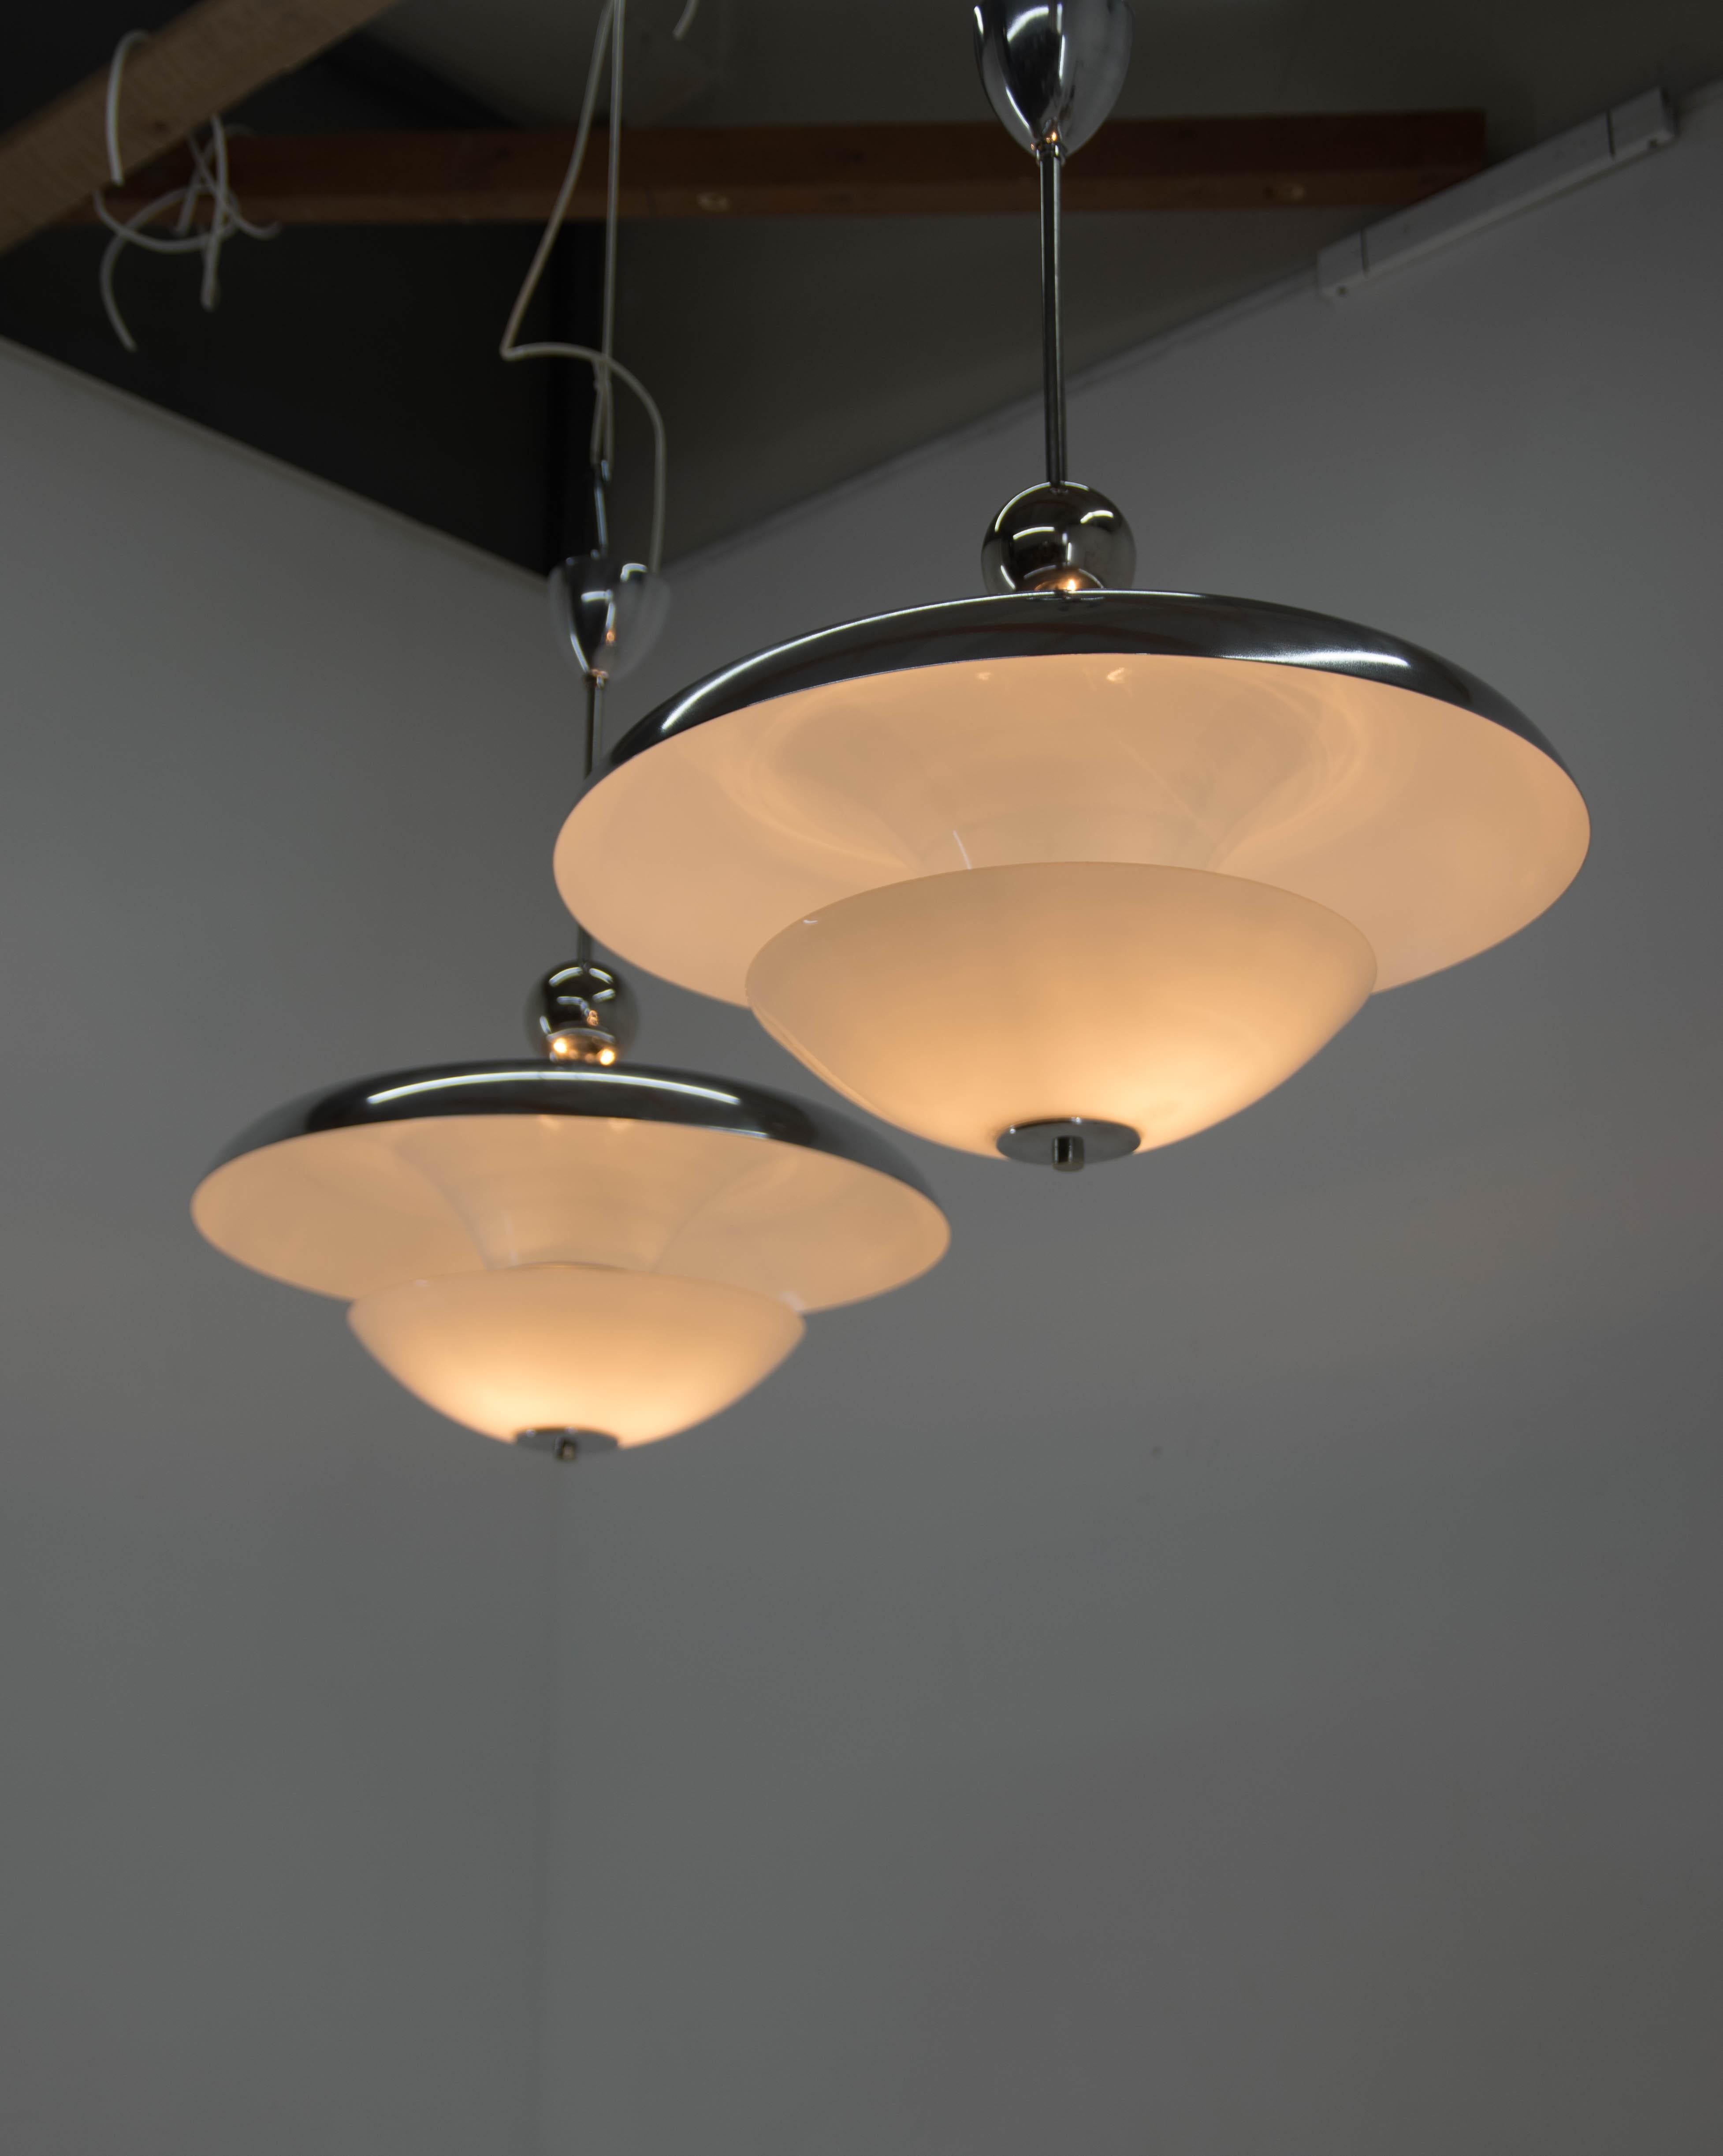 Set of two Bauhaus chandeliers designed and produced by Franta Anyz.
Professionally restored: polished, new white paint, rewired: two separate circuits - 3+2 E25-E27 bulbs
Opaline glass marked by CMS Triplex.
US wiring compatible.